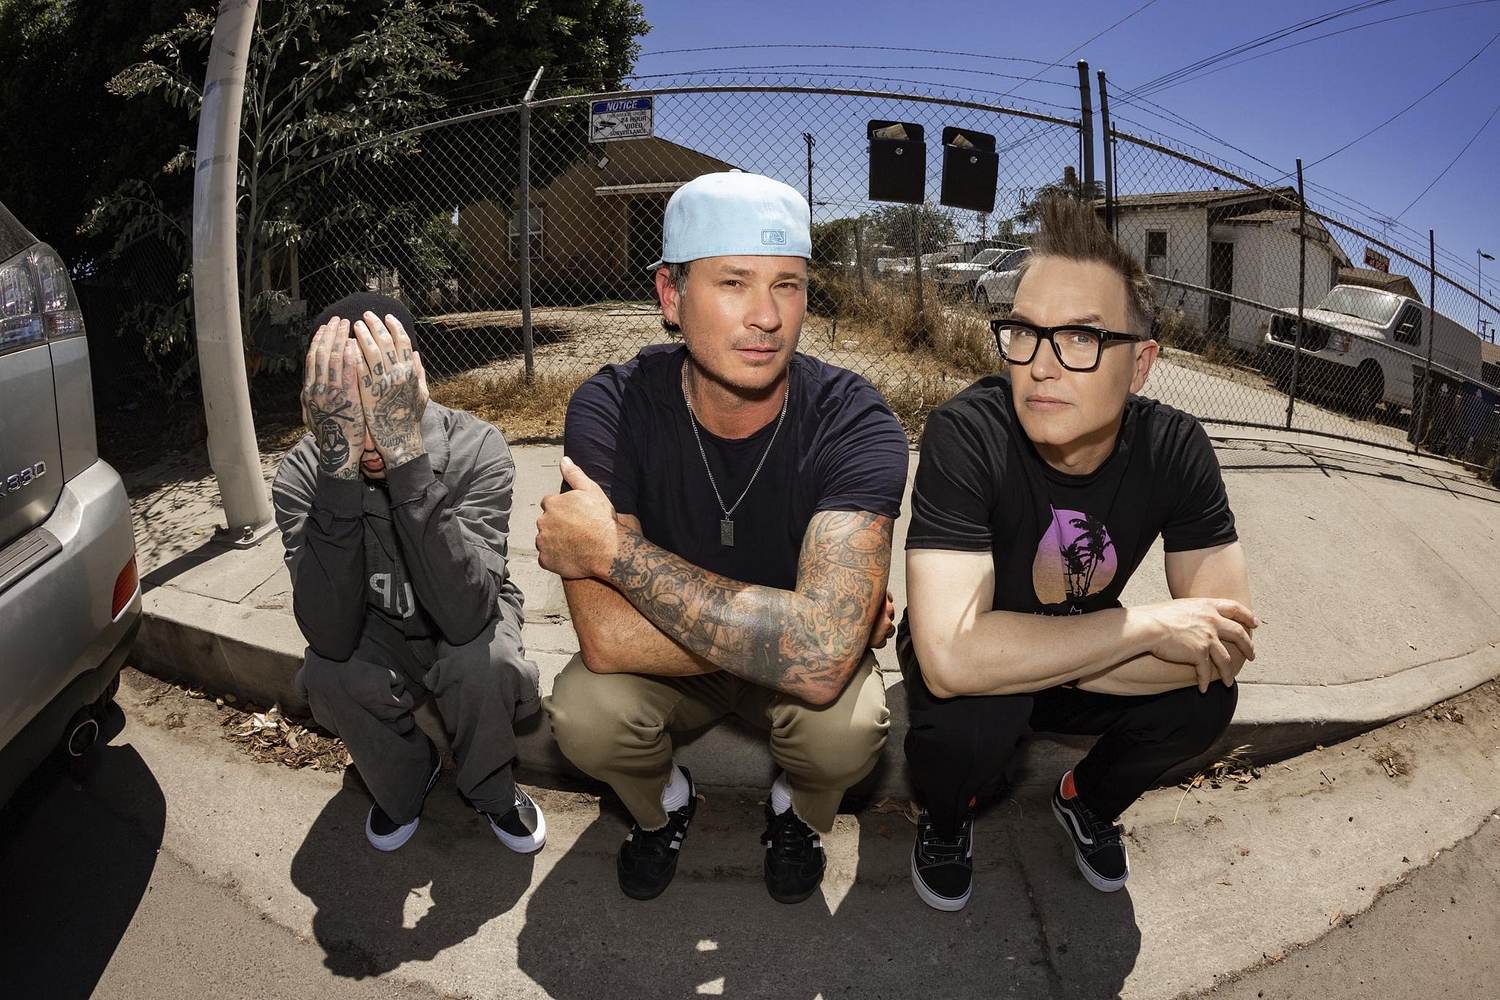 blink-182 share new single ‘One More Time’ & confirm new album